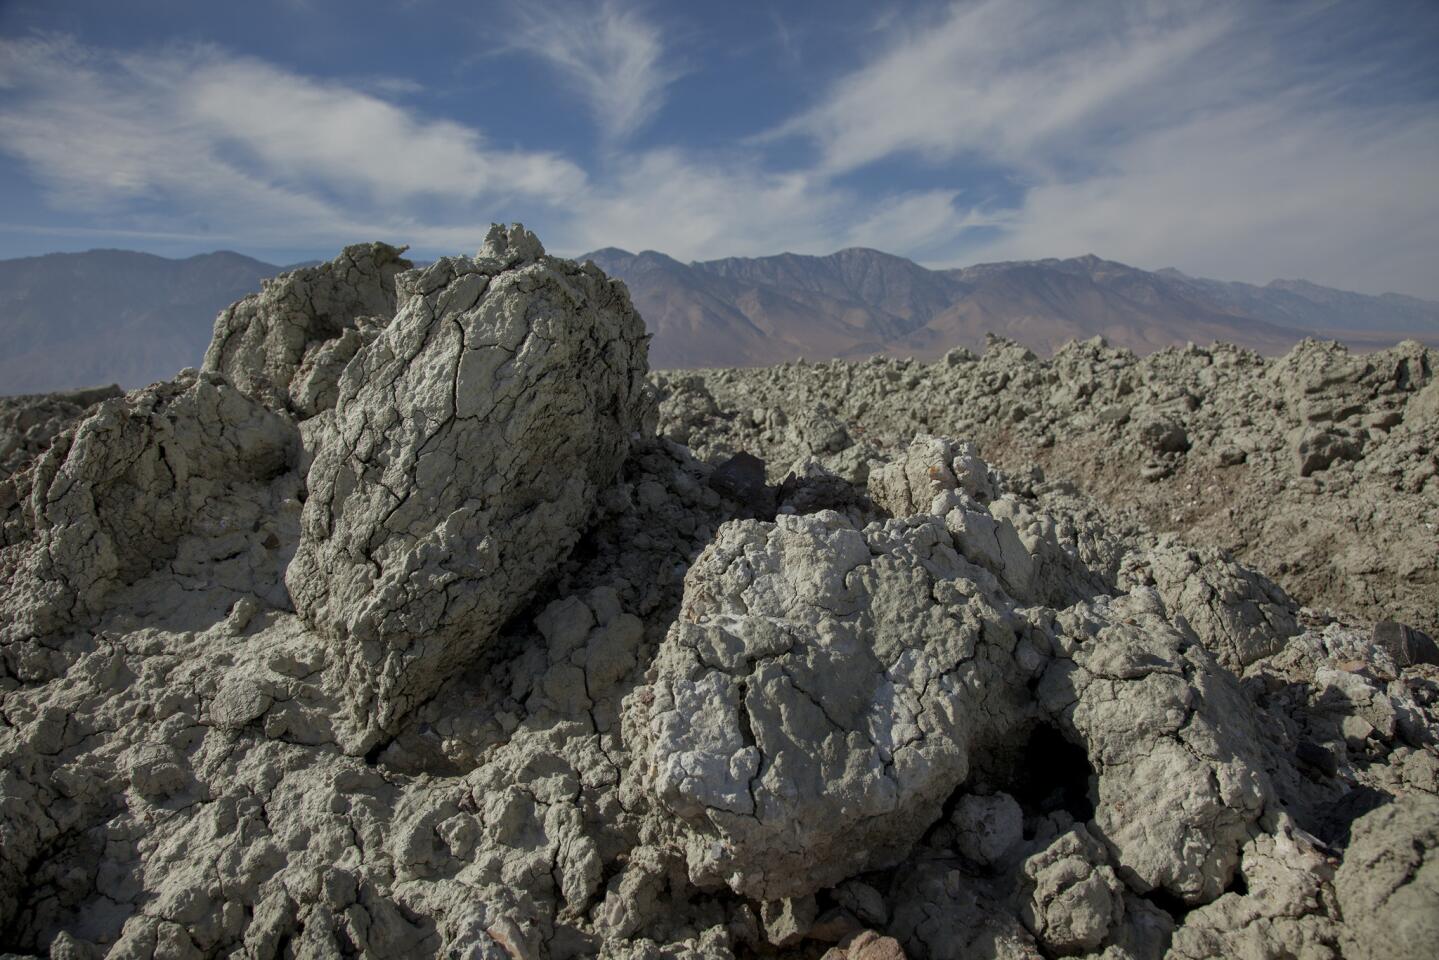 Under a new approach, dirt clods the size of basketballs and larger will be used to control dust on the dry Owens Lake bed. The clods will bottle up the dust for years before breaking down, at which point the process will be repeated.